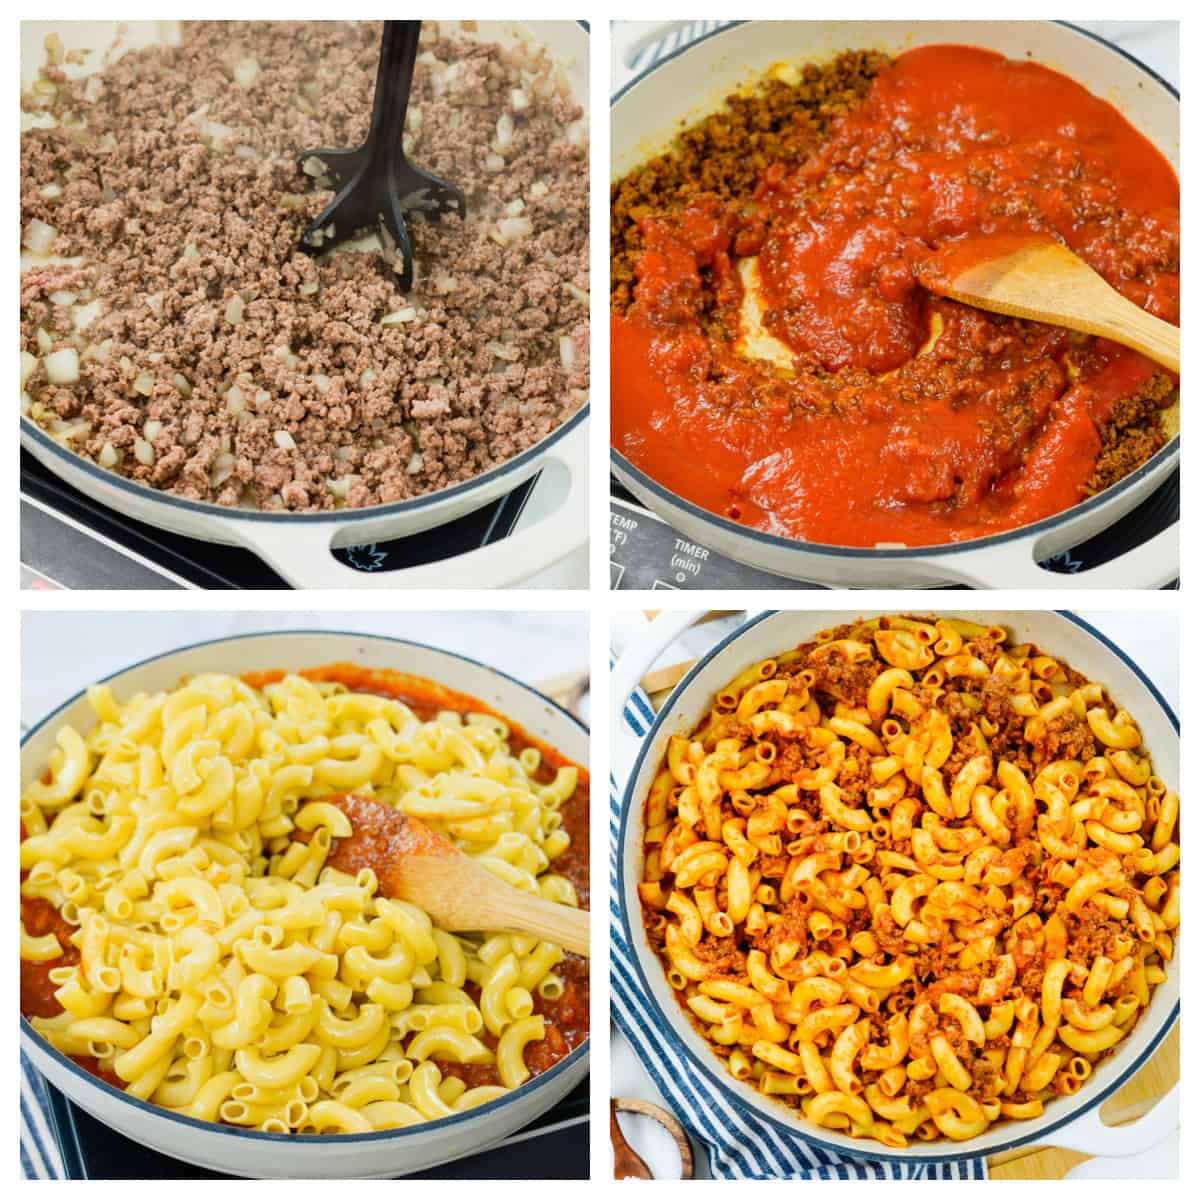 Collage showing how to make beefaroni.